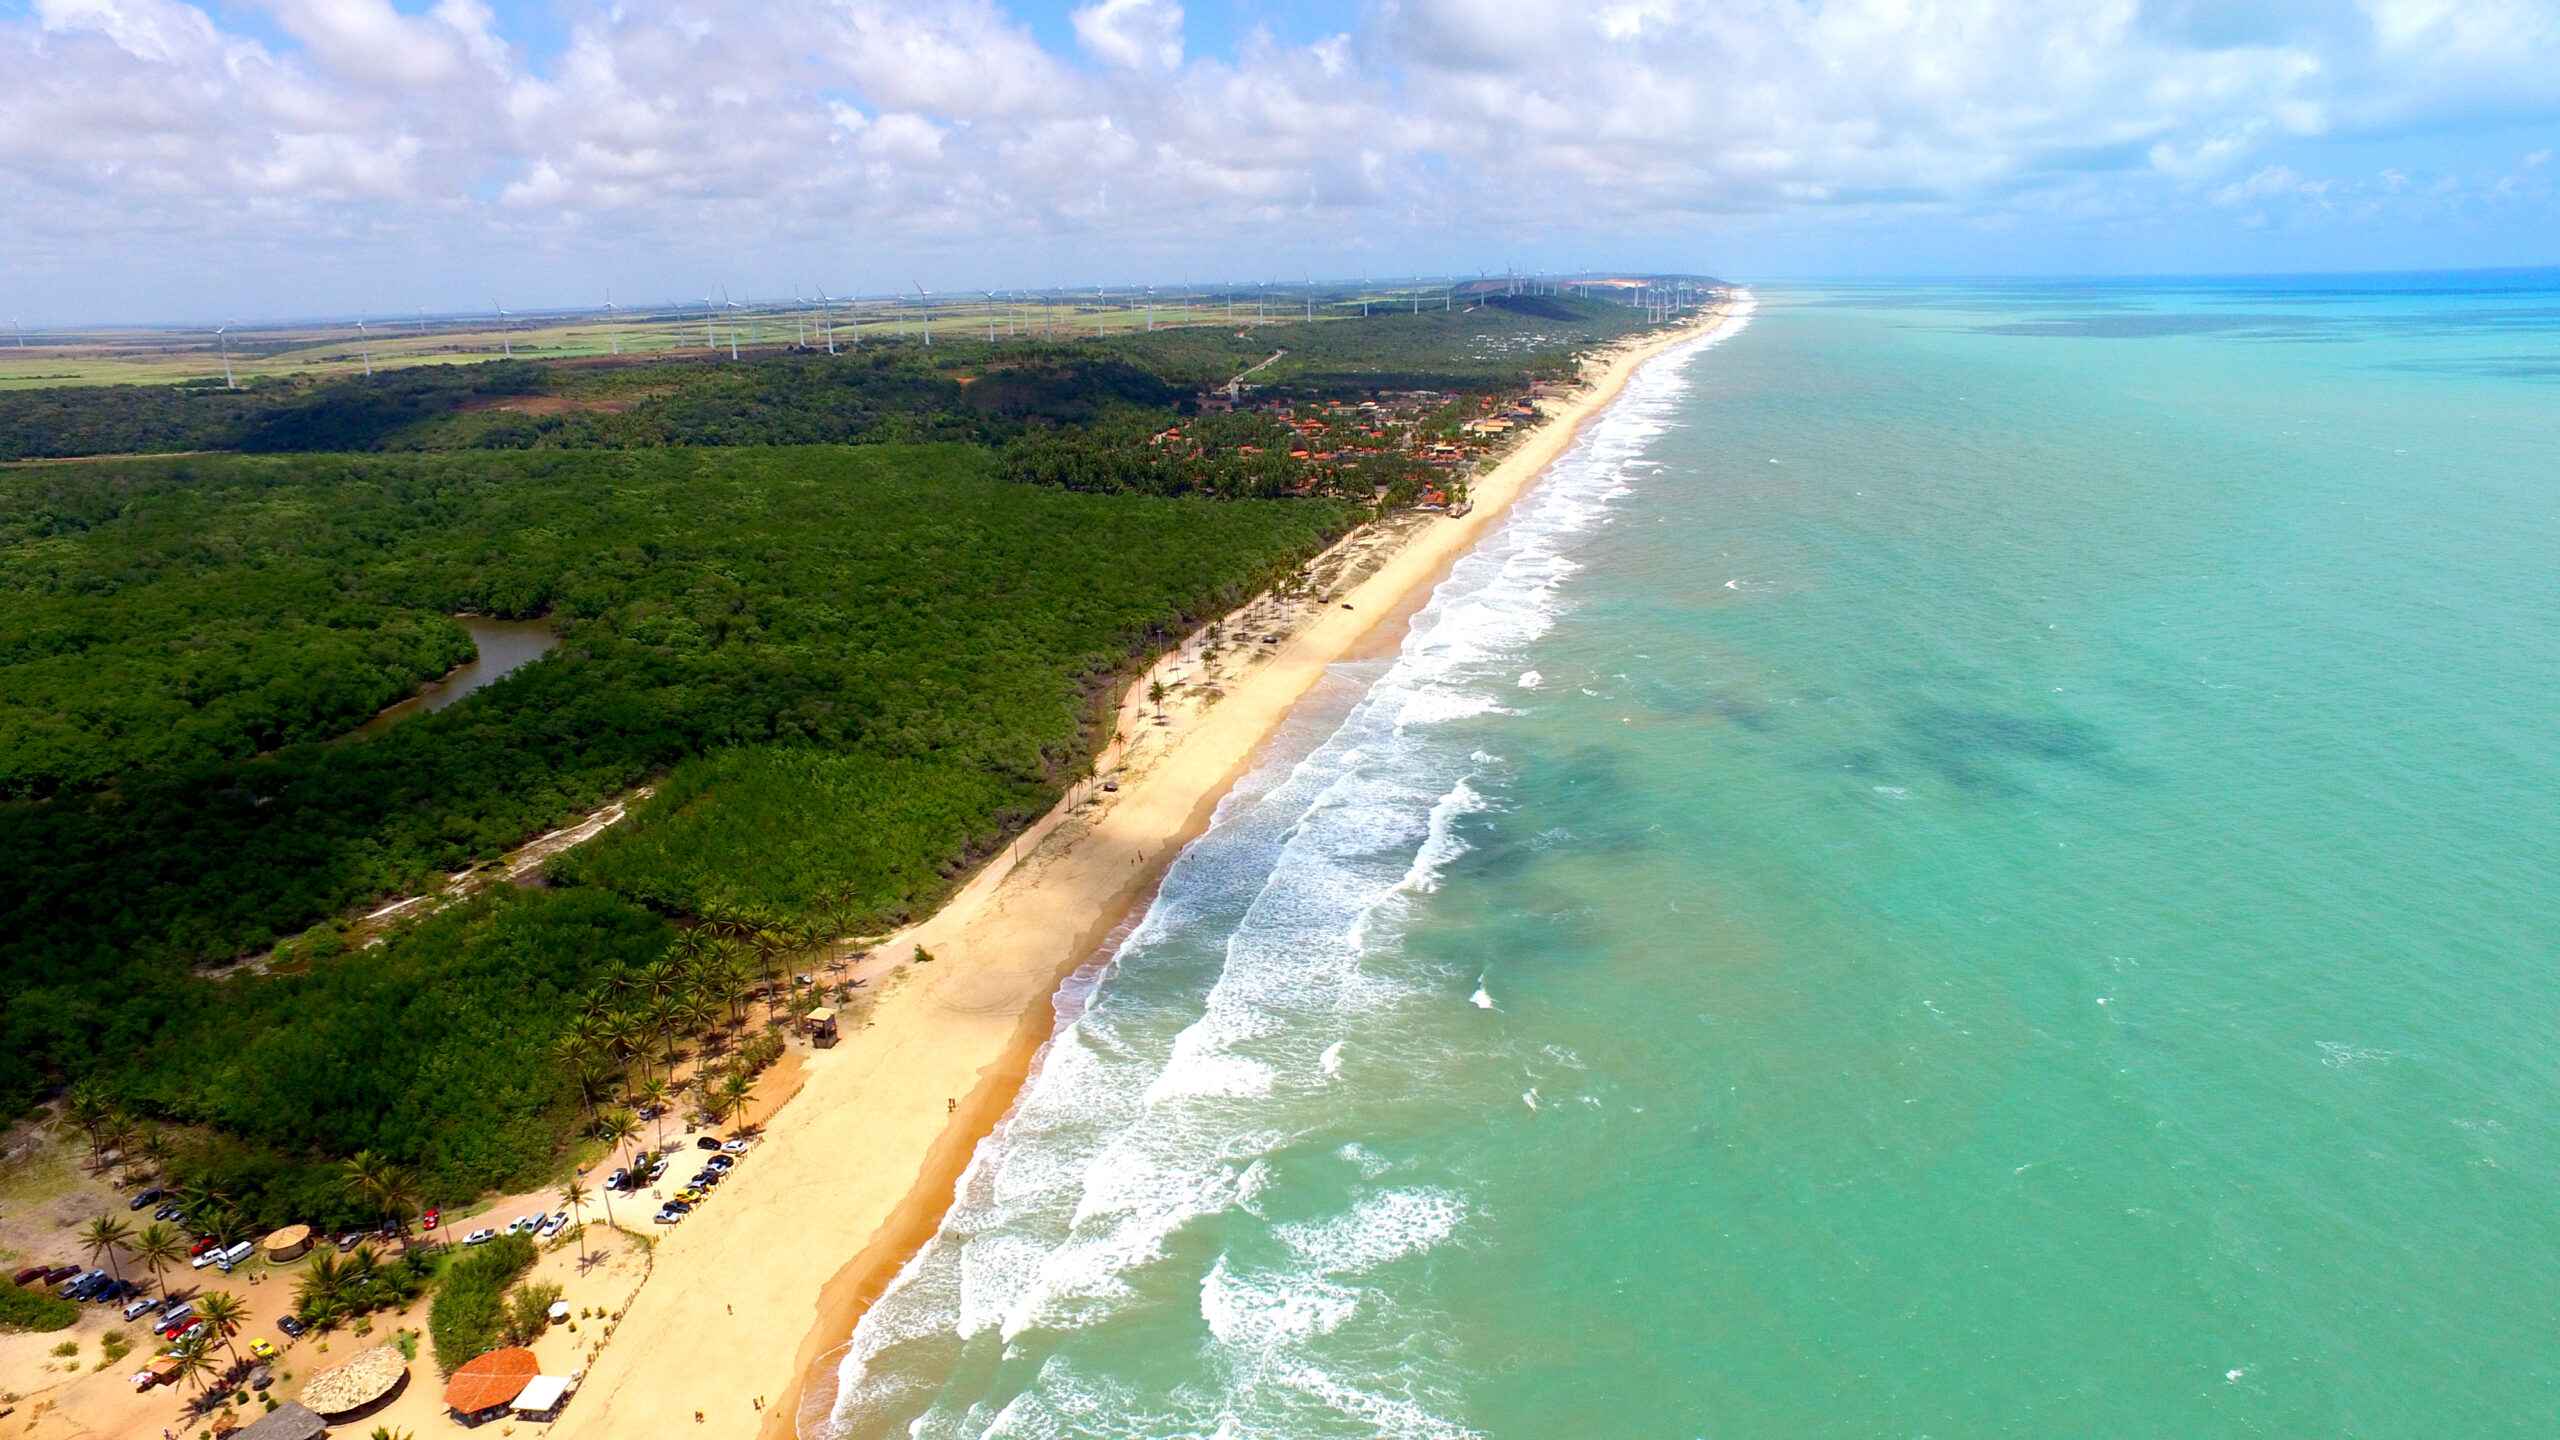 BARRA DE CAMARATUBA, PARAIBA, BRAZIL, October 25 2015. Mataraca Coast is located between Paraiba and Rio Grande do Norte, capitals. It is known by your wonderful beaches and their landscape which is part of Paraiba and Brazil’s postcard.